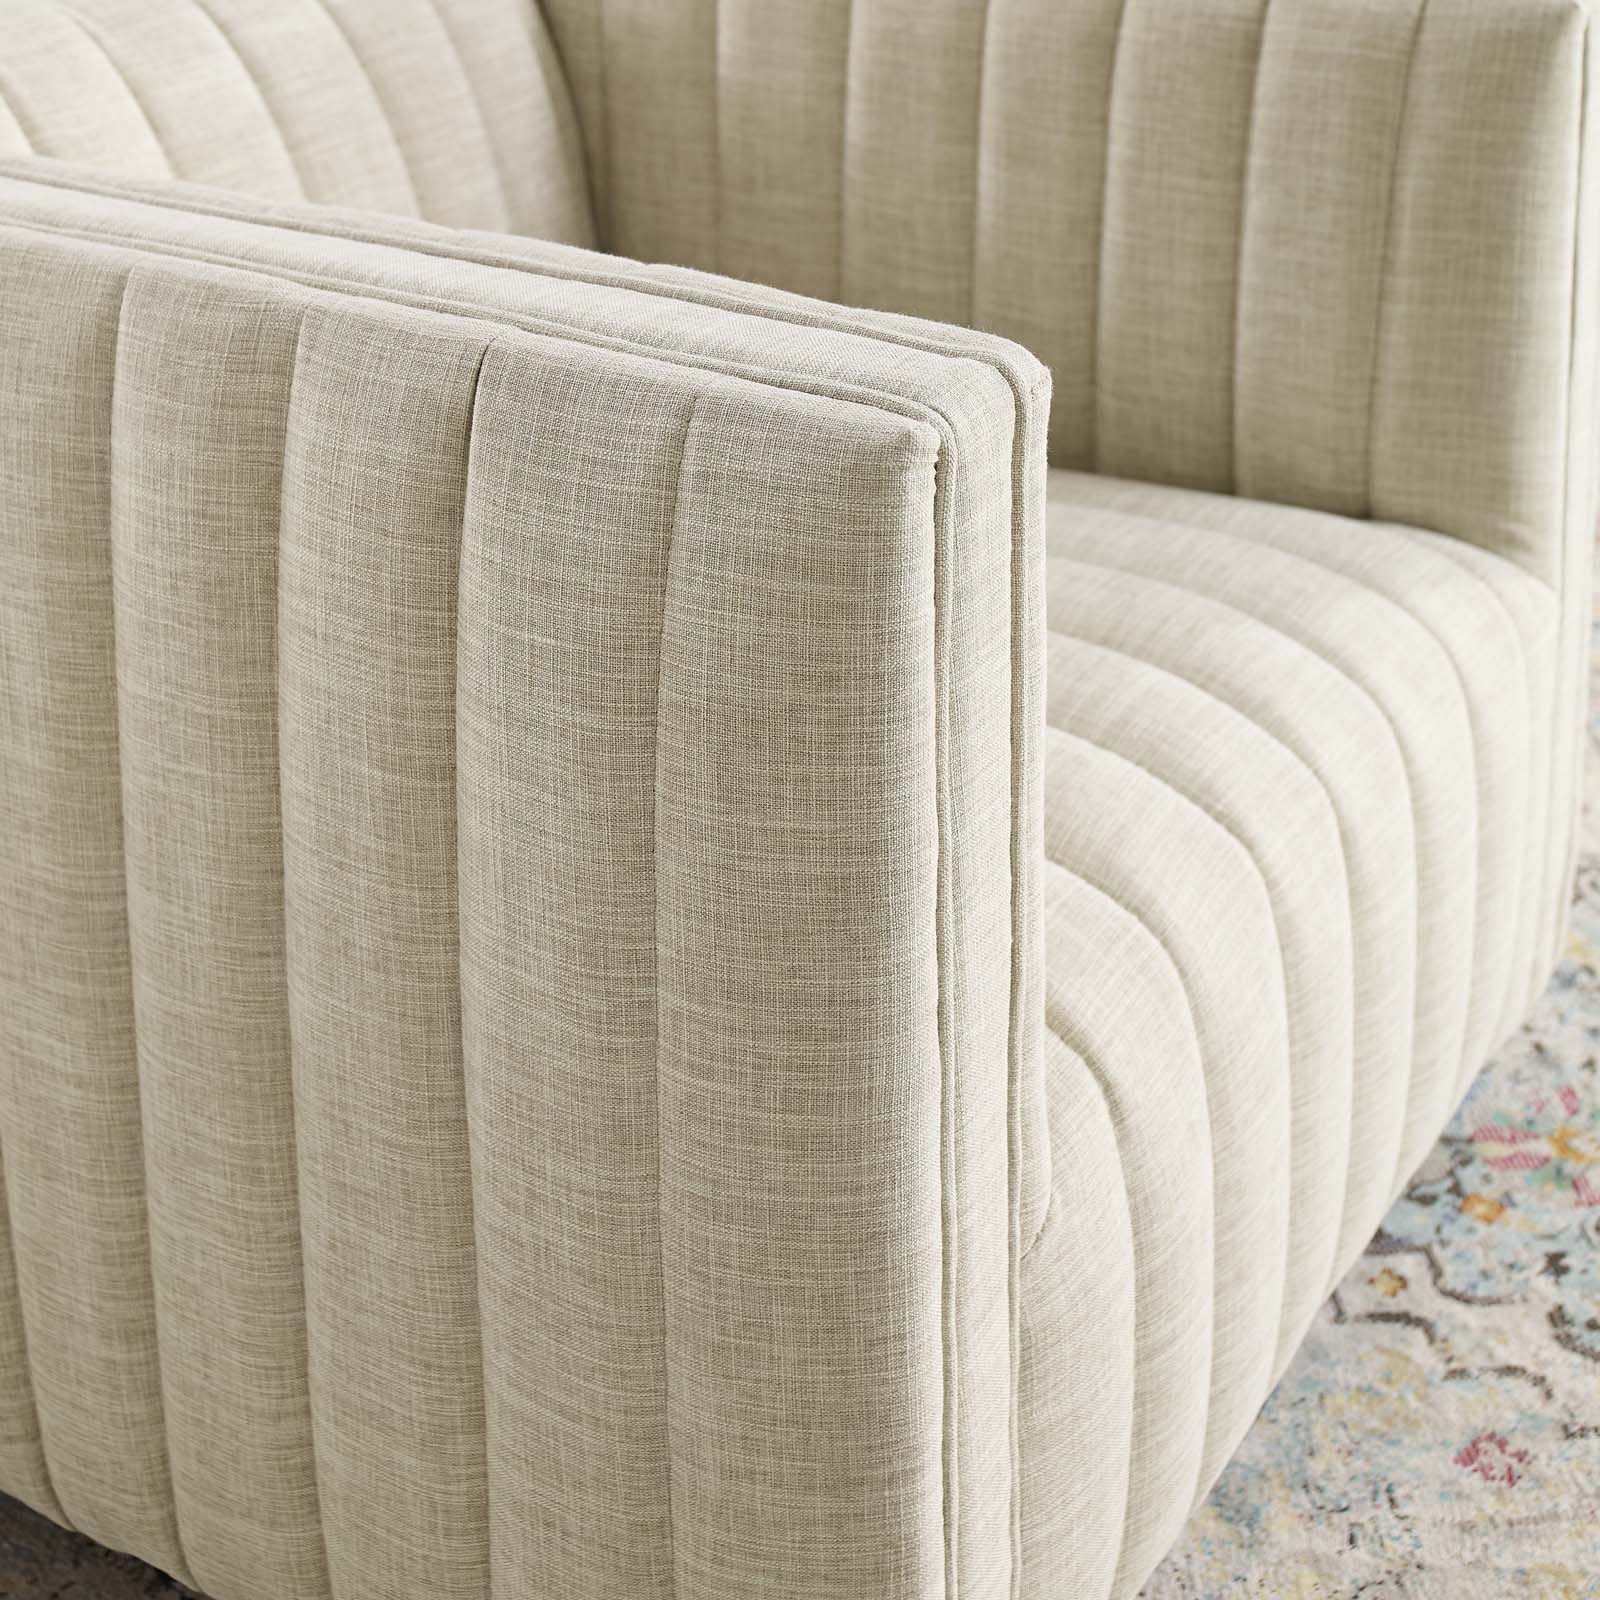 Conjure Tufted Swivel Upholstered Armchair - East Shore Modern Home Furnishings